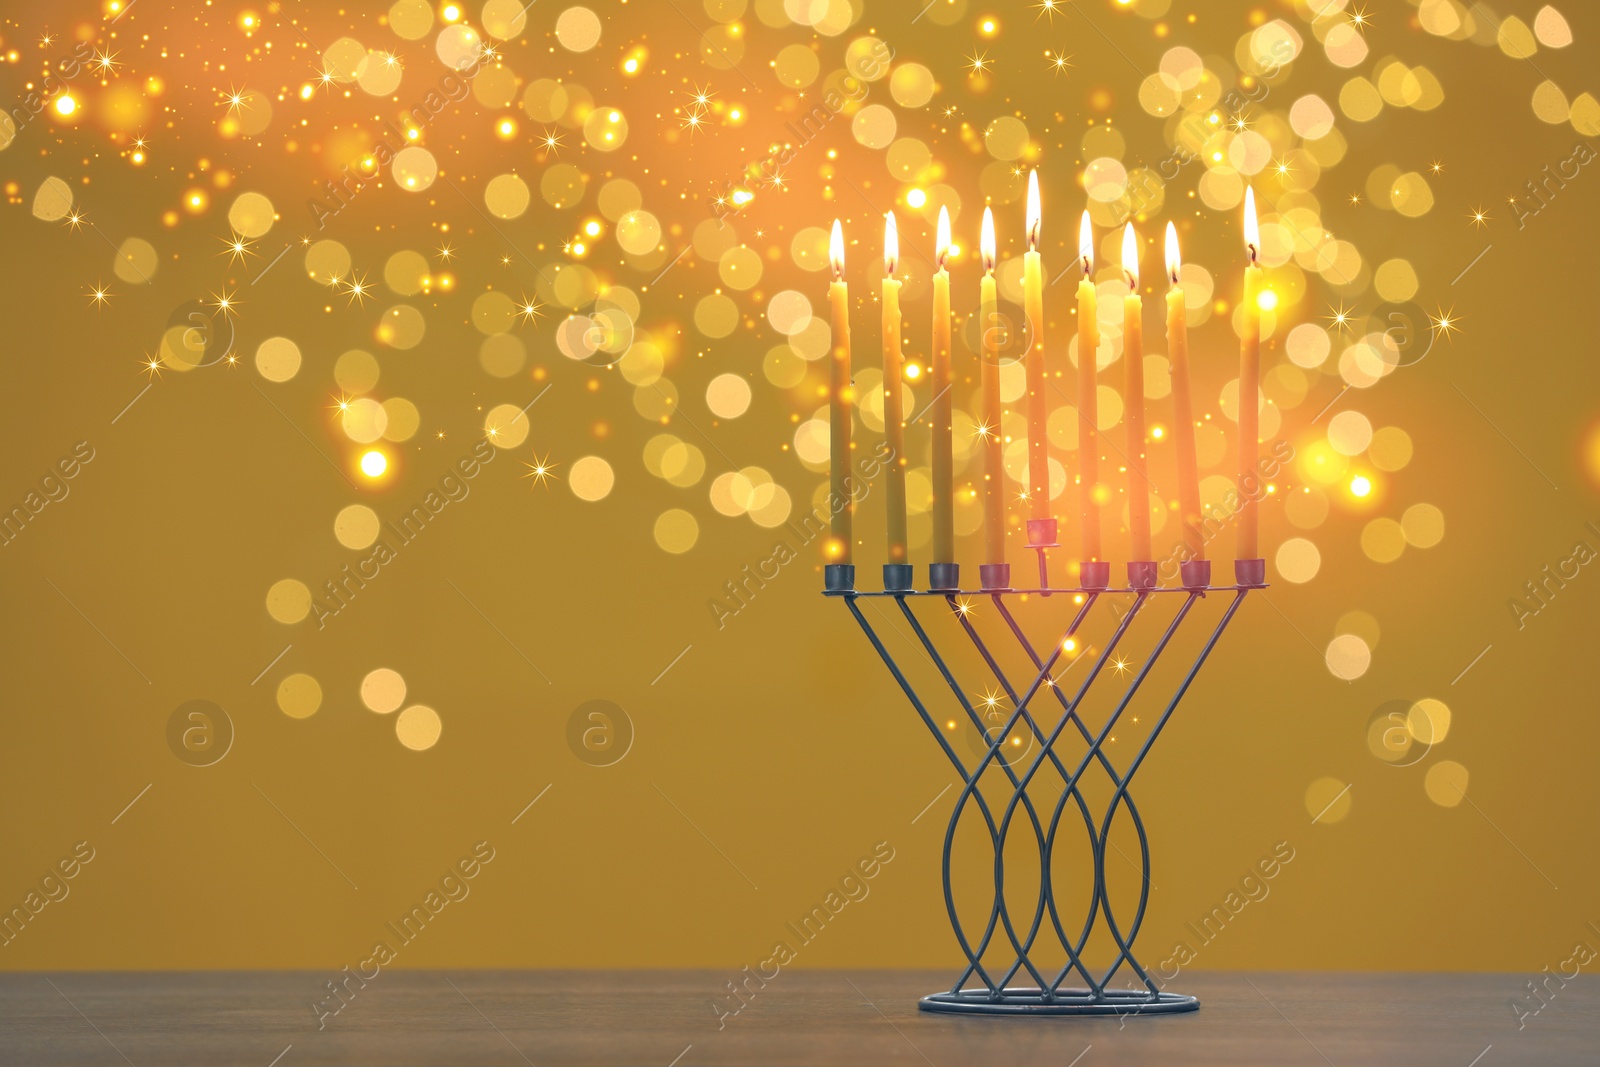 Image of Hanukkah celebration. Menorah with burning candles on table against goldenrod background with blurred lights, space for text